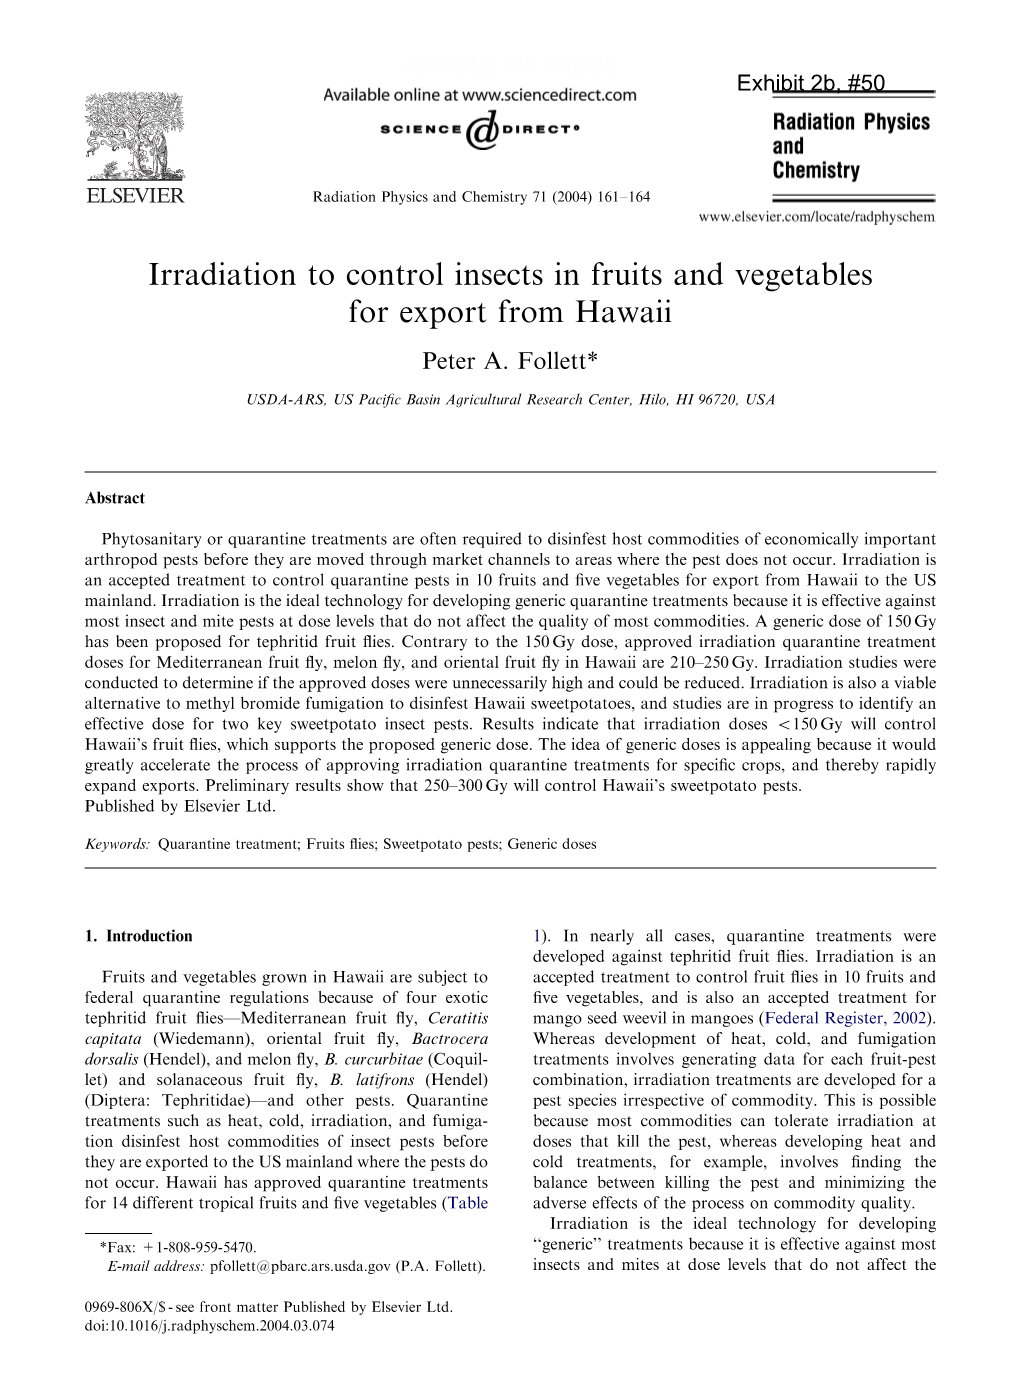 Irradiation to Control Insects in Fruits and Vegetables for Export from Hawaii Peter A